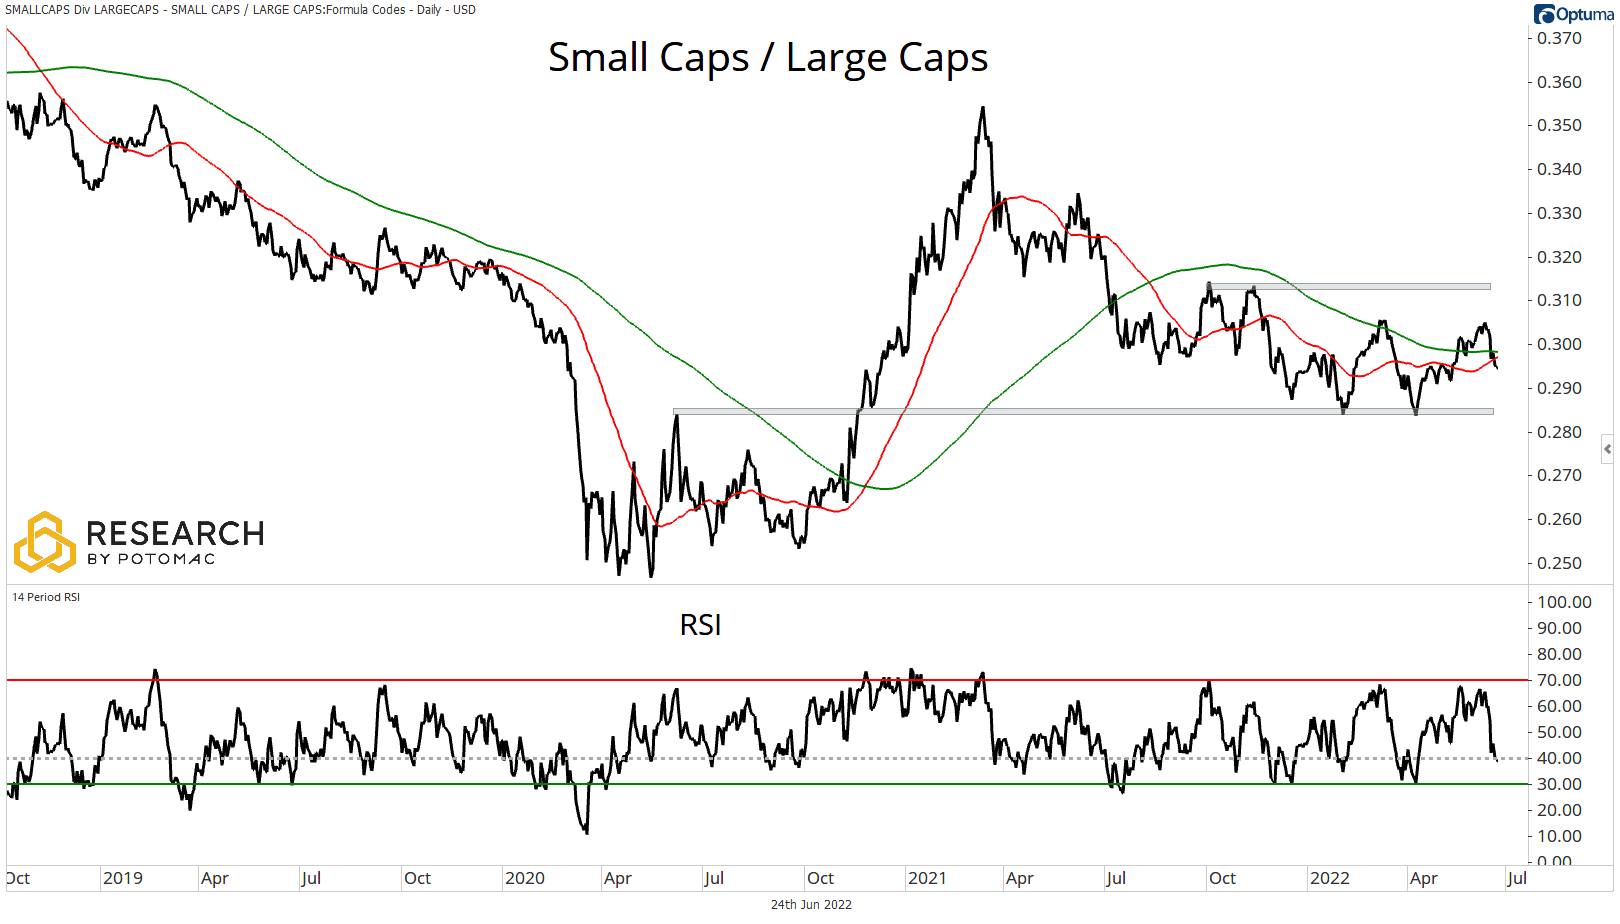 Small Caps / Large Caps chart for March 25th research.